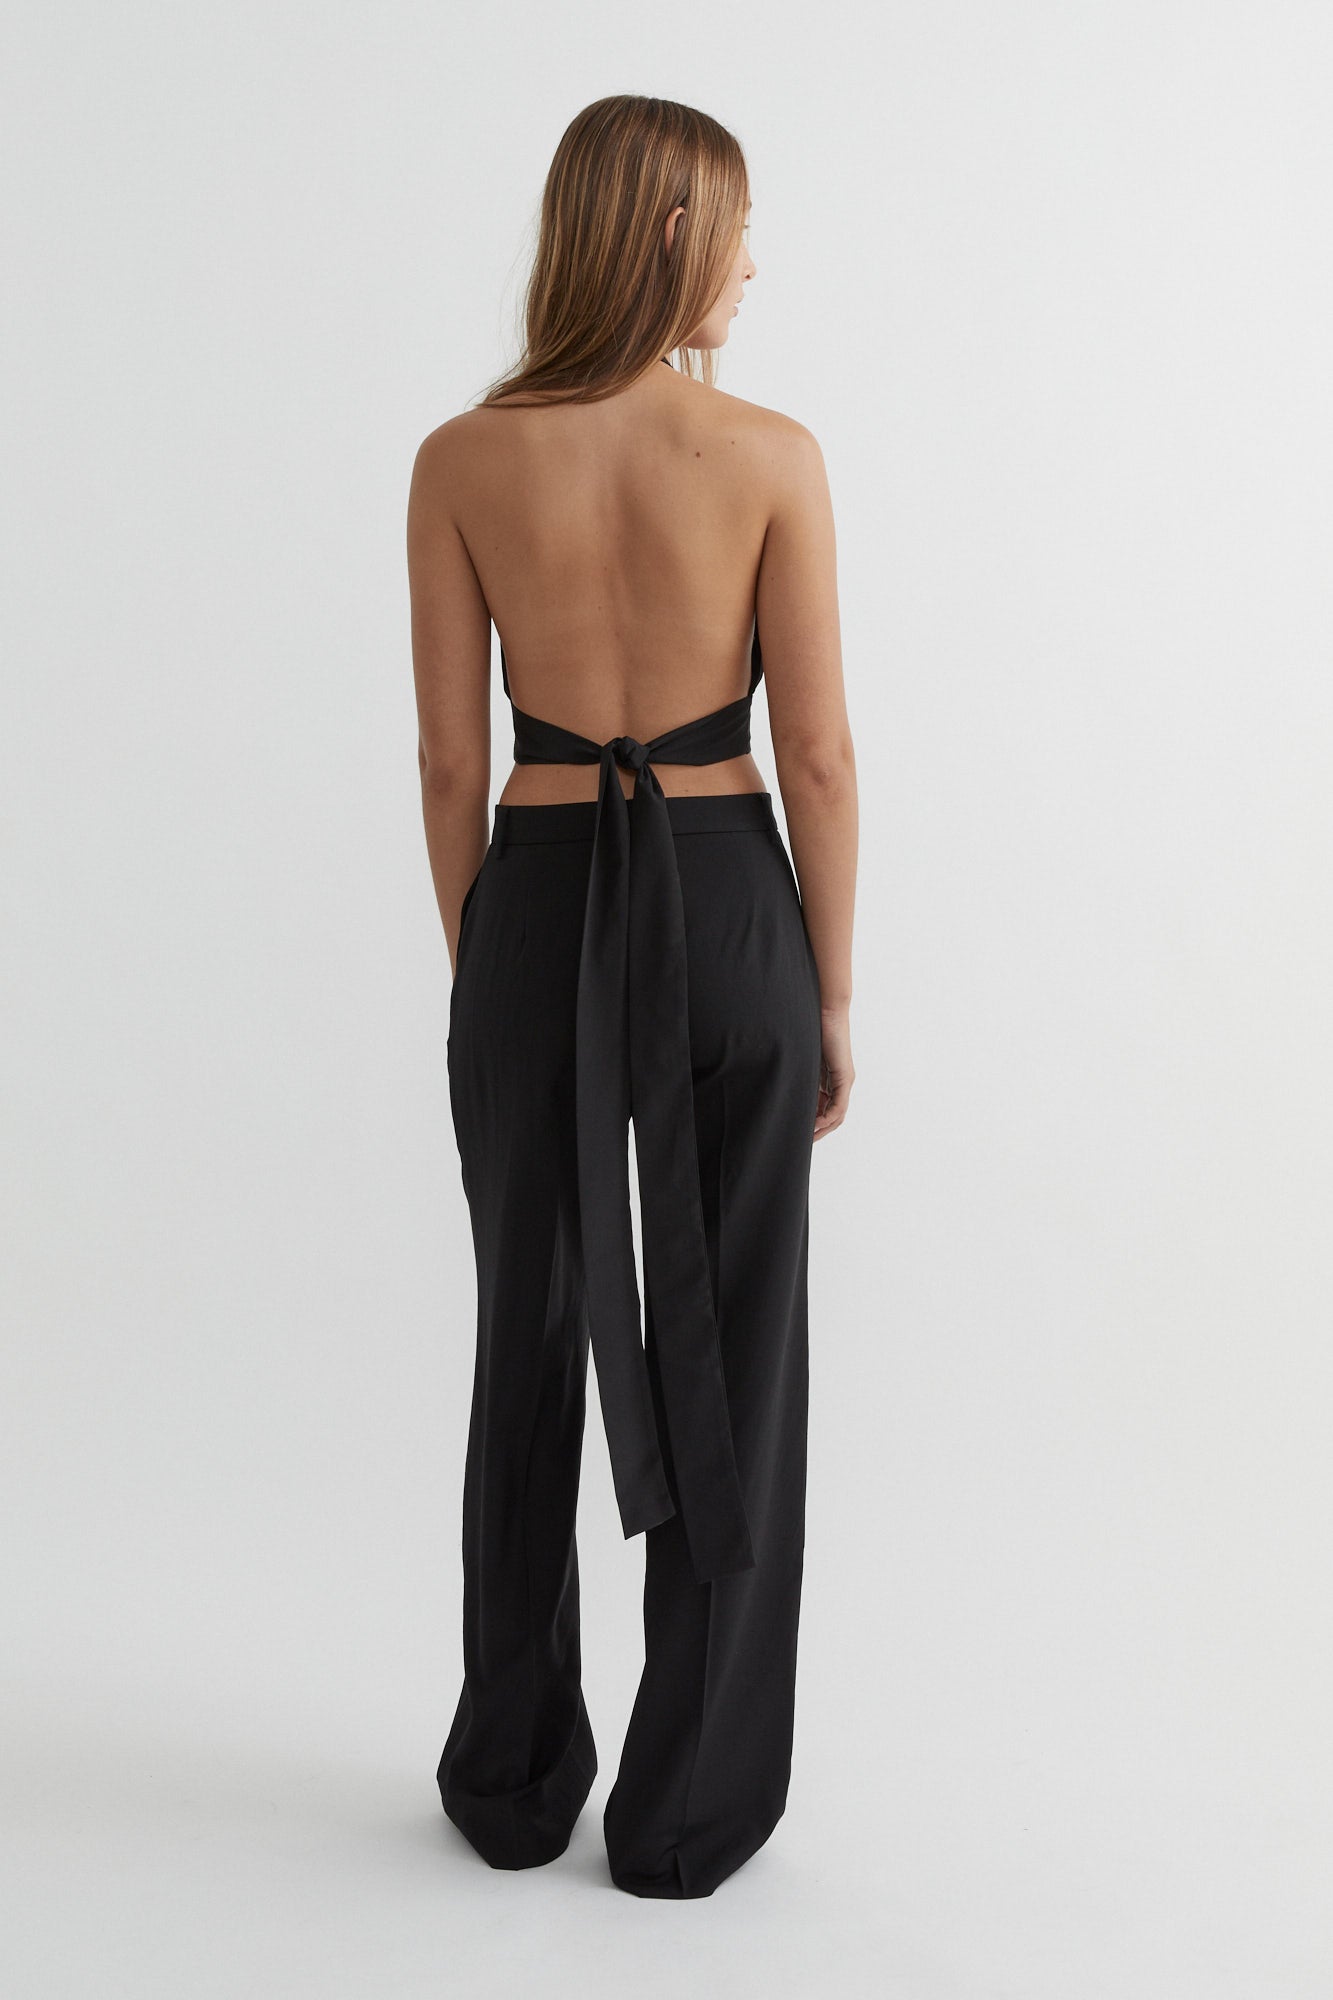 SAINT Lookbook Silk Tie-up Top black backless going out / party top. Made in Australia